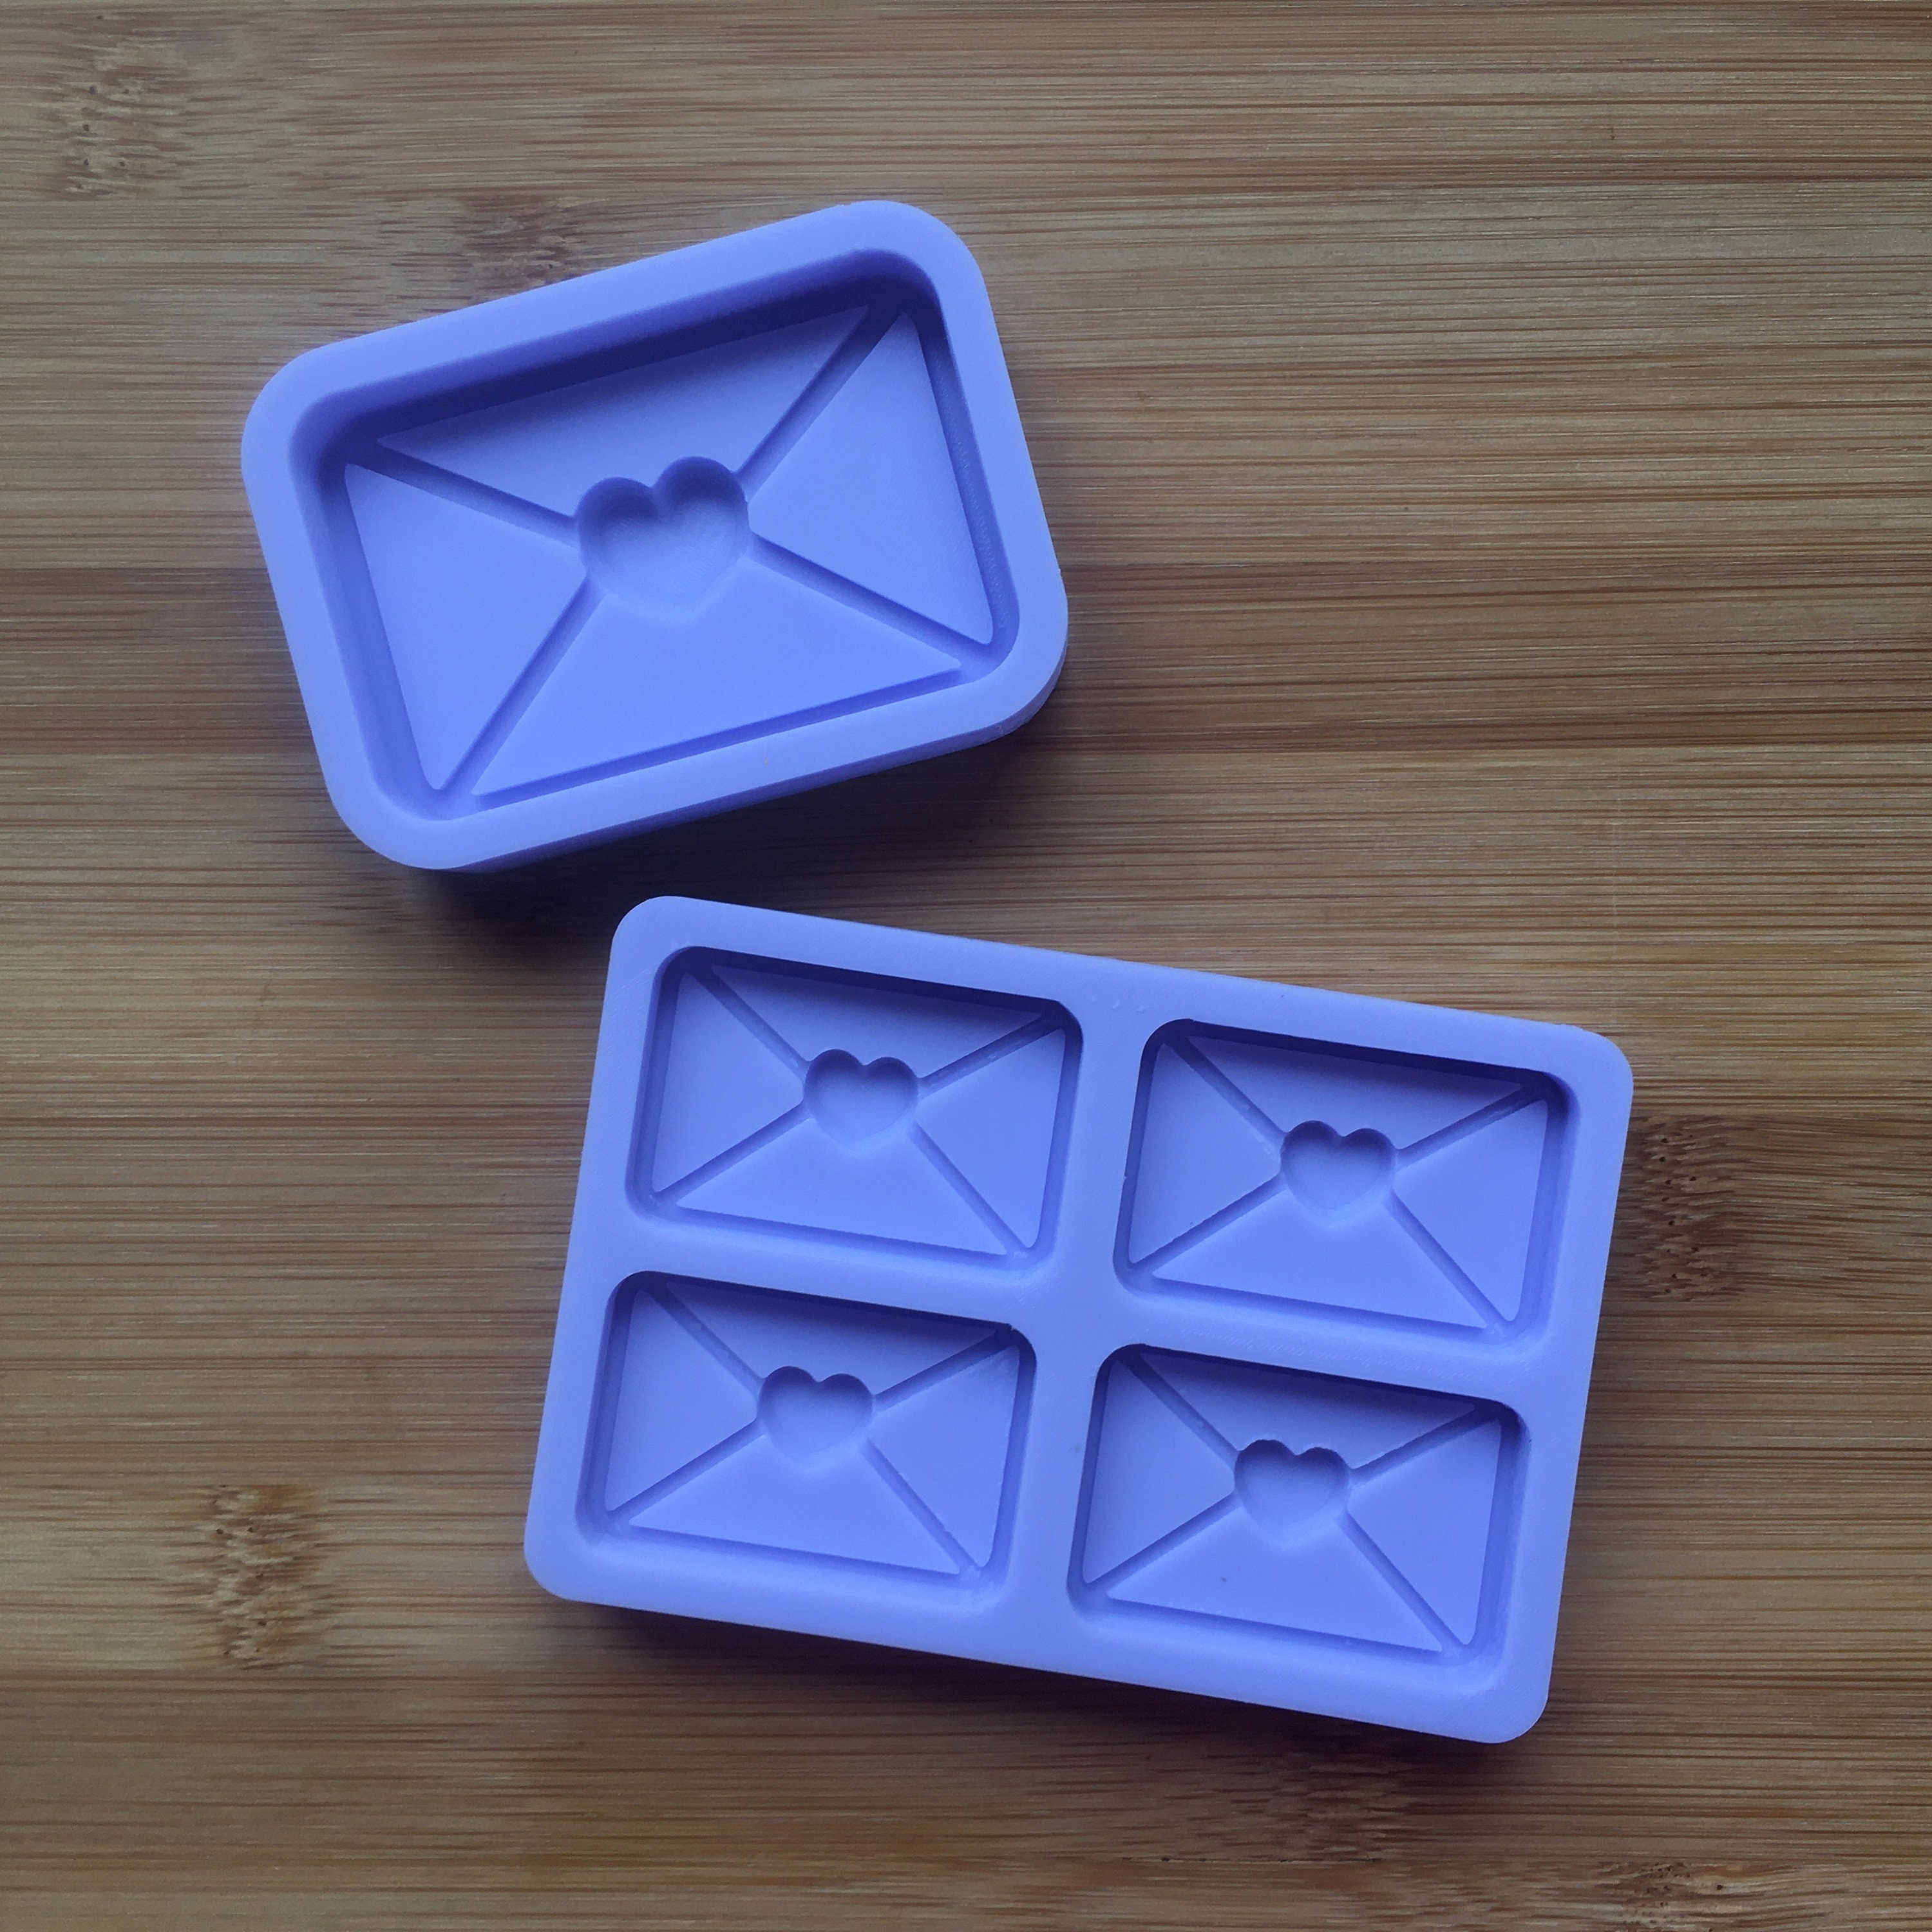  Mini Star Christmas Silicone Molds for Chocolates, Candy &  Desserts - Durable Star Silicone Mold for Jello, Candle, Wax Melt & Holiday  Baking Supplies - Perfect for Bite Size Star Shaped